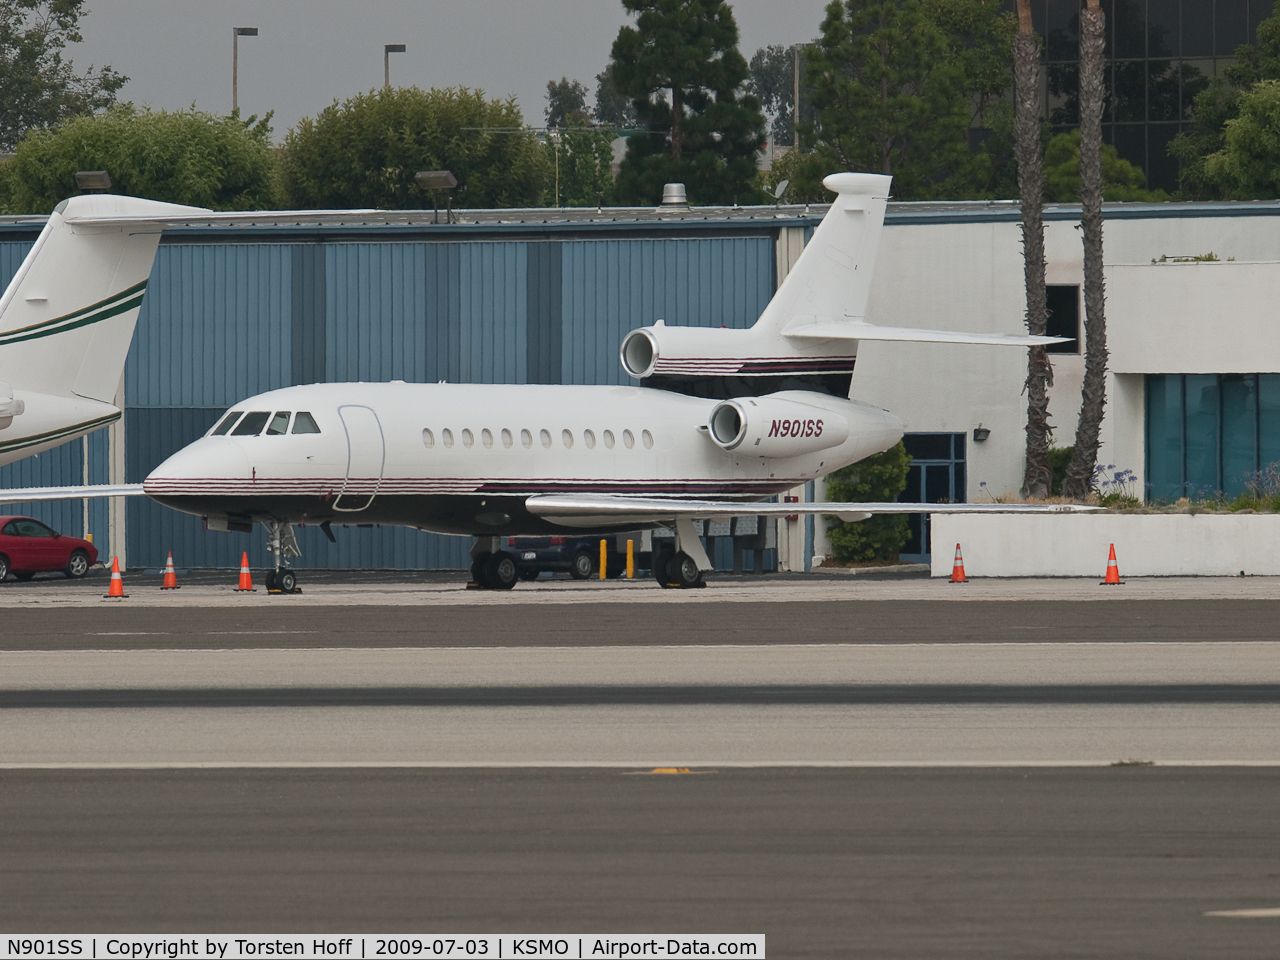 N901SS, 2000 Dassault Falcon 900 C/N 187, N901SS parked at KSMO